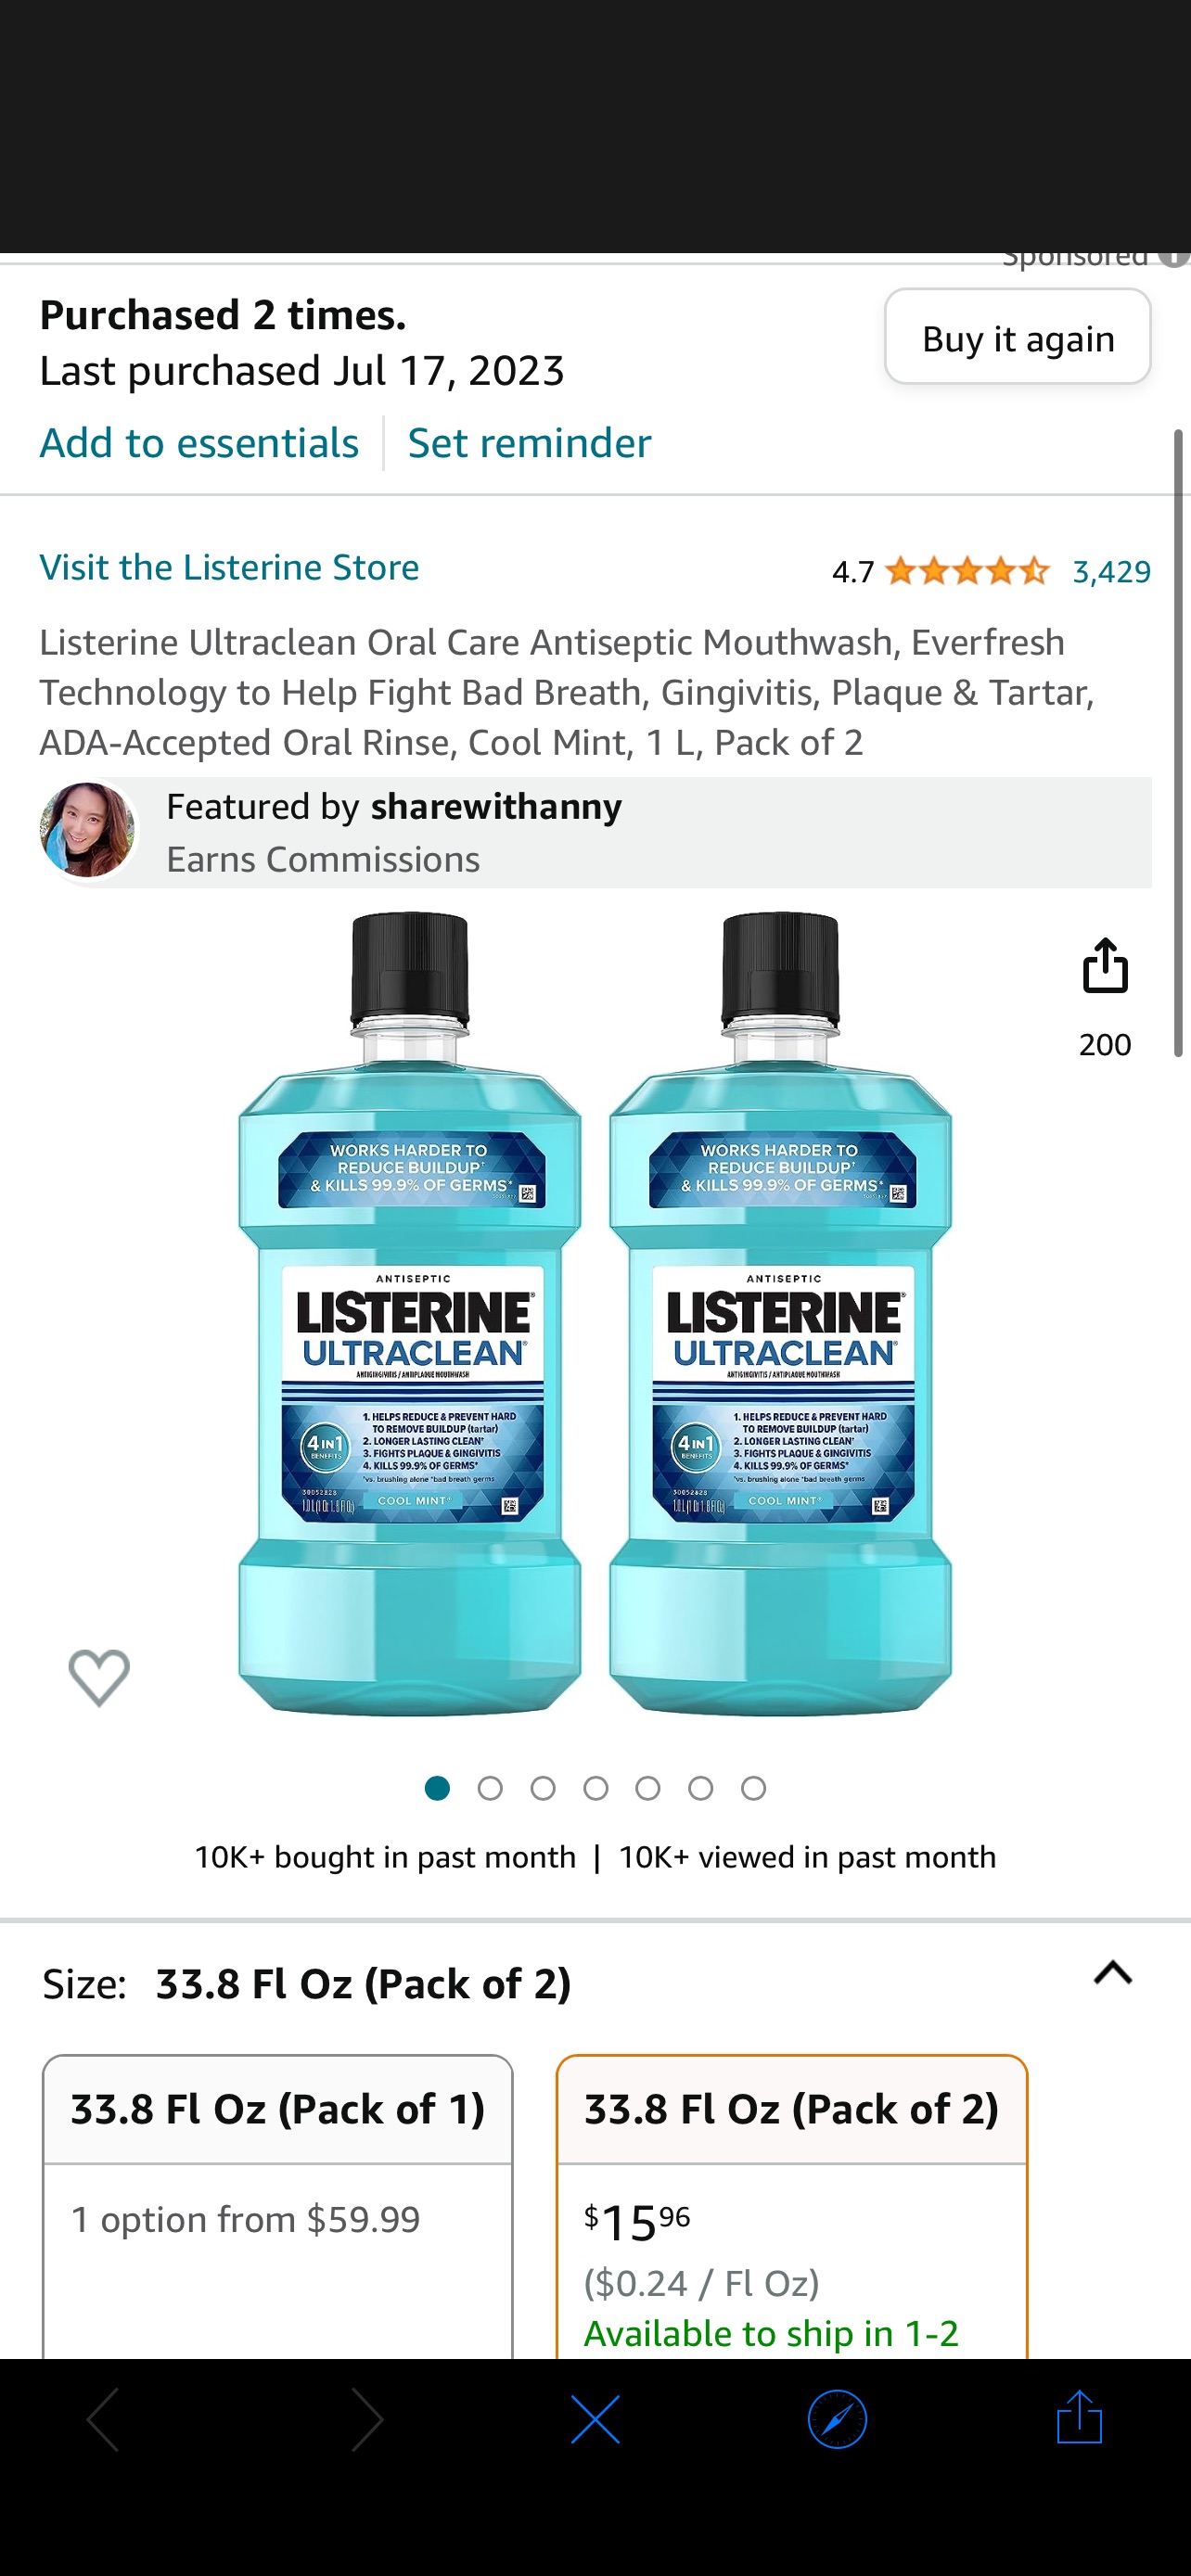 Amazon.com : Listerine Ultraclean Oral Care Antiseptic Mouthwash, Everfresh Technology to Help Fight Bad Breath, Gingivitis, Plaque & Tartar, ADA-Accepted Oral Rinse, Cool Mint, 1 L, Pack of 2 : Healt